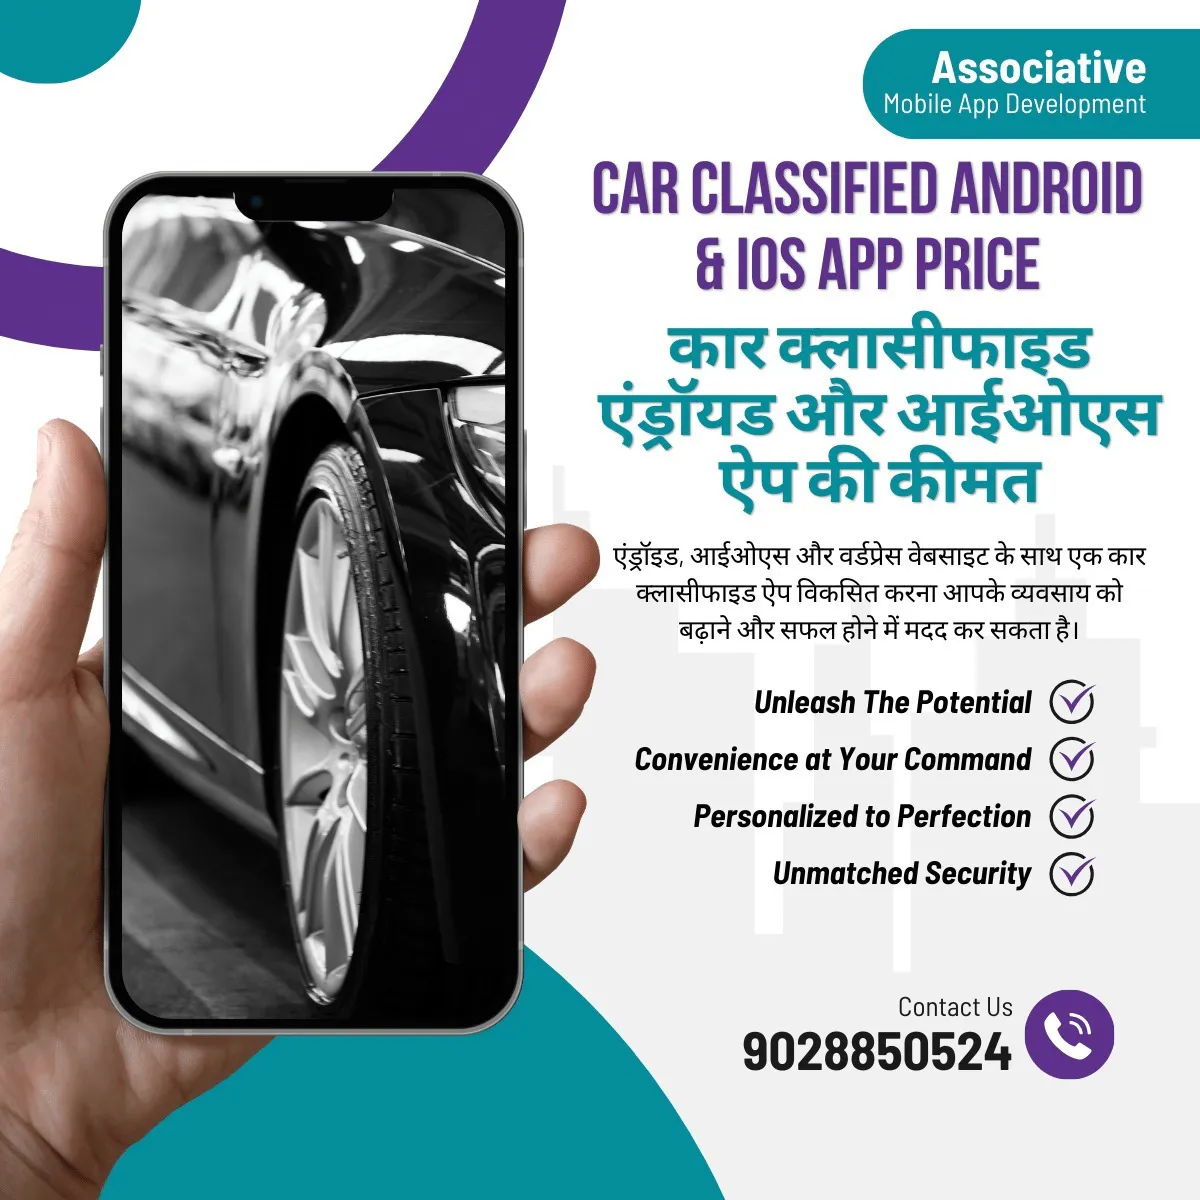 Car Classified Android & iOS App